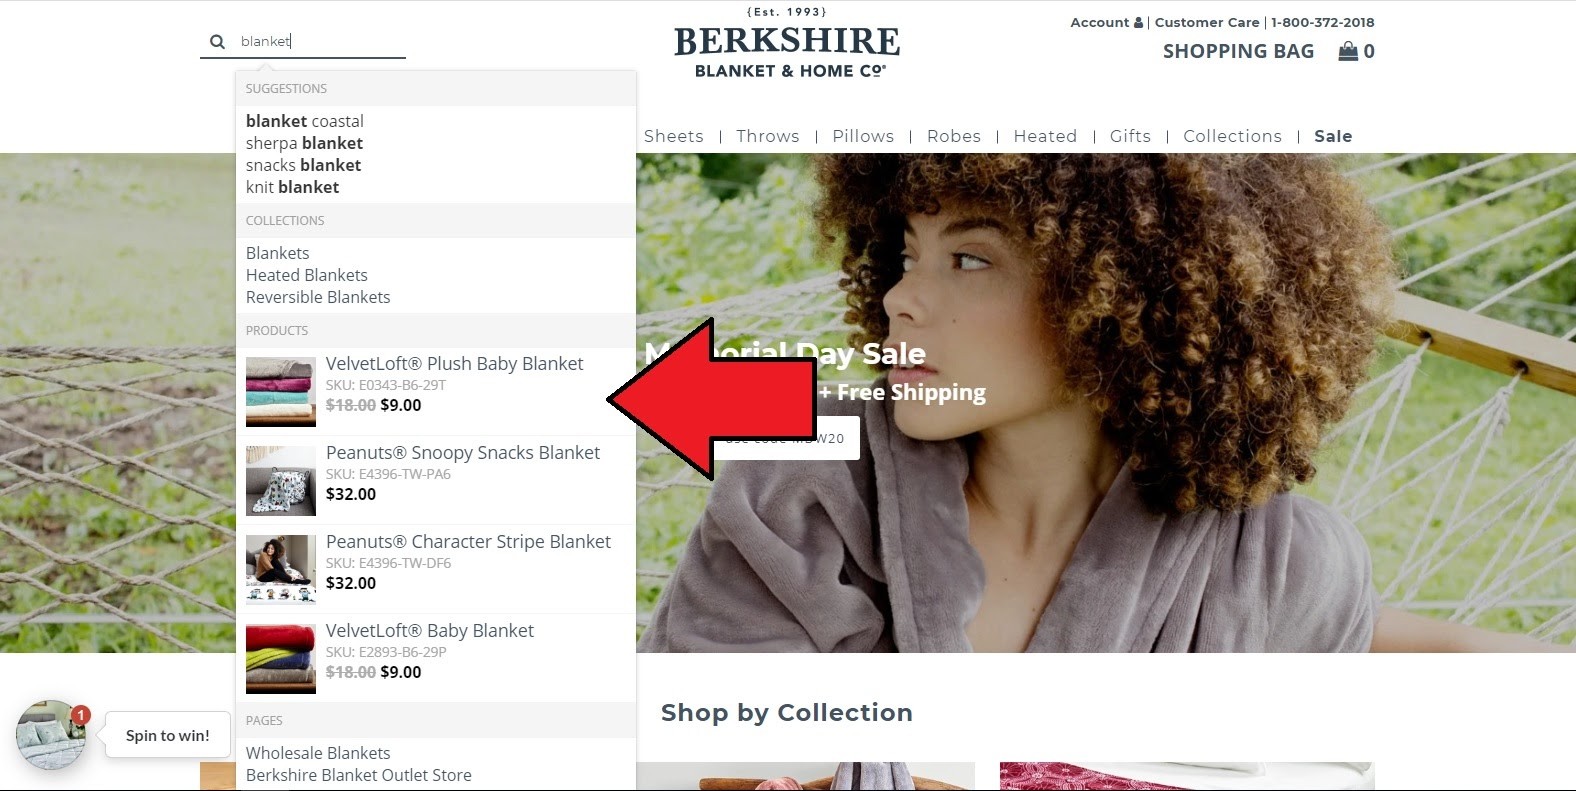 Berkshire Blanket and Home CO Product Search